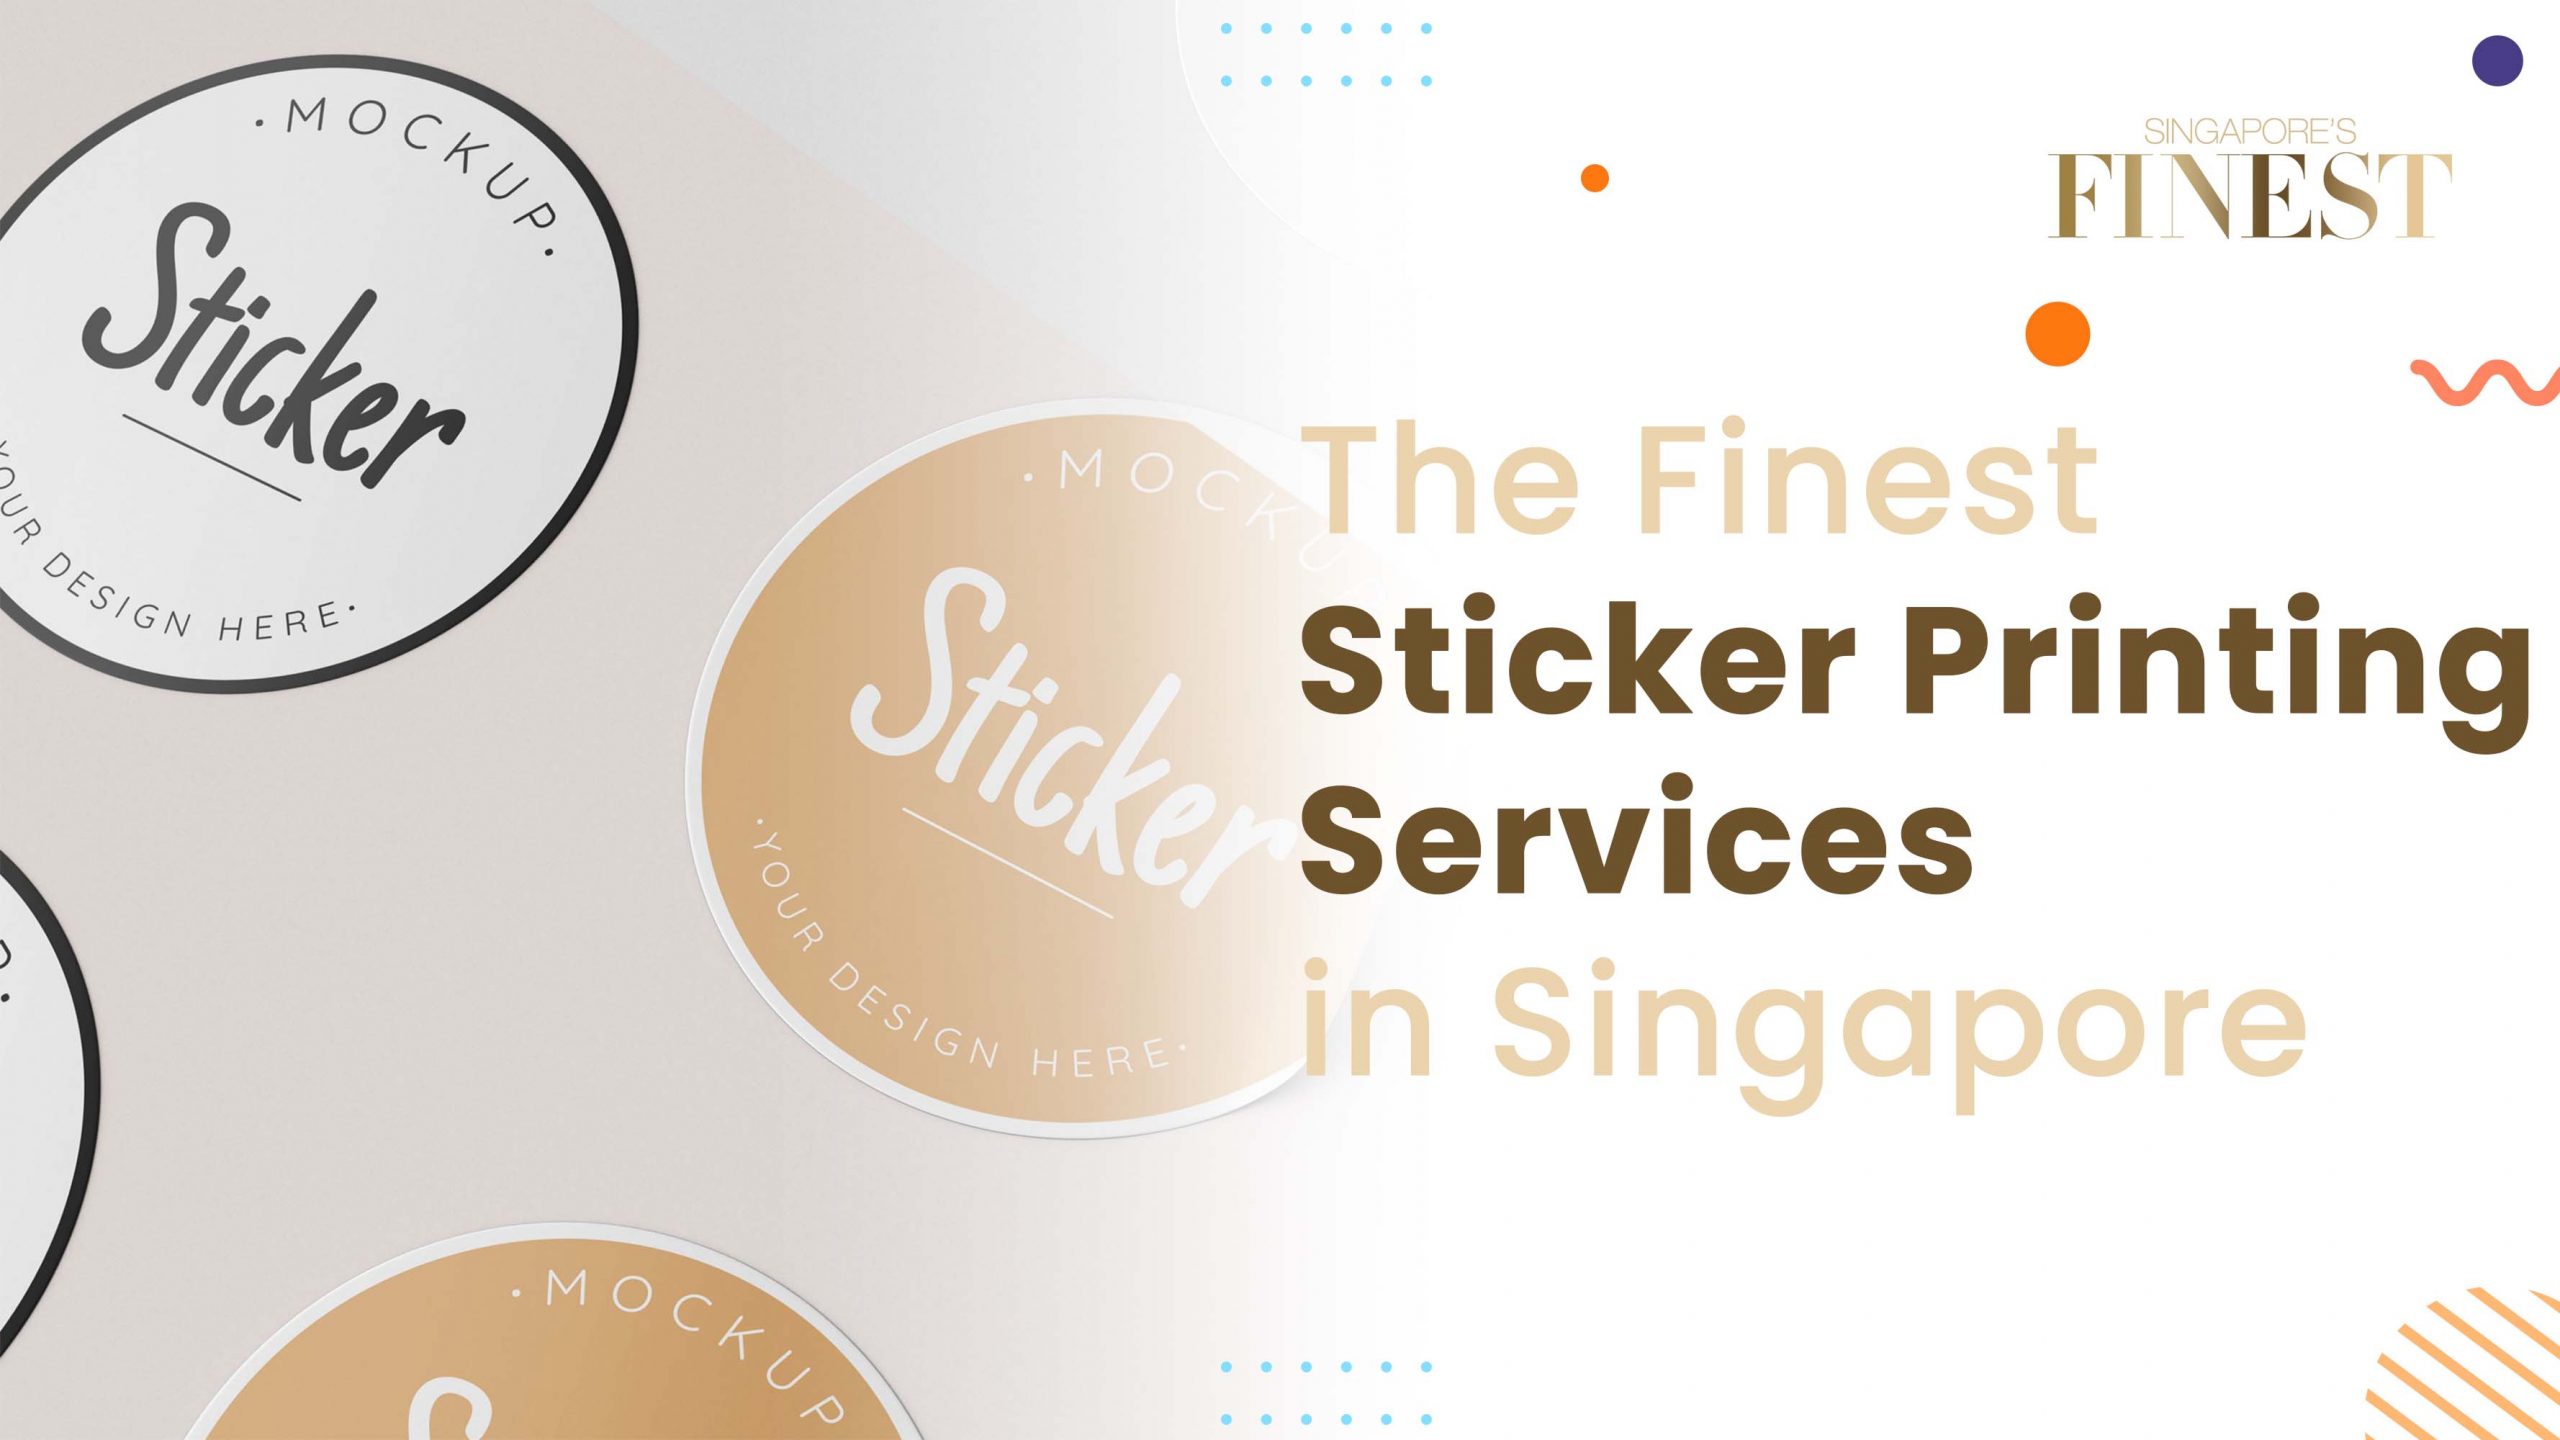 Finest Sticker Printing Services in Singapore